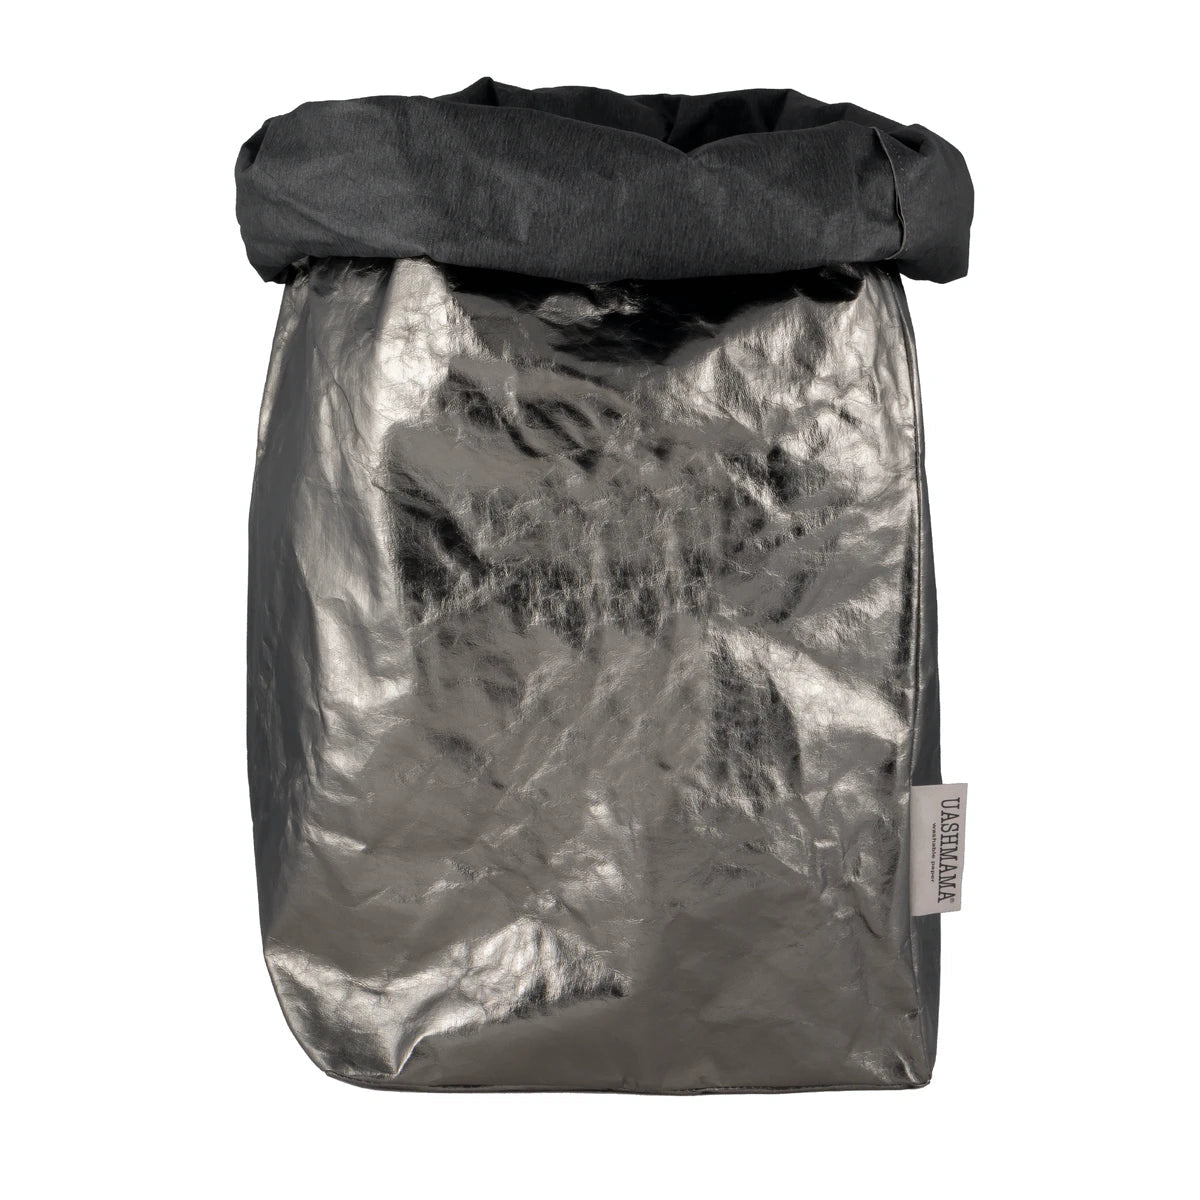 A washable paper bag is shown. The bag is rolled down at the top and features a UASHMAMA logo label on the bottom left corner. The bag pictured is the gigantic size in metallic dark grey.